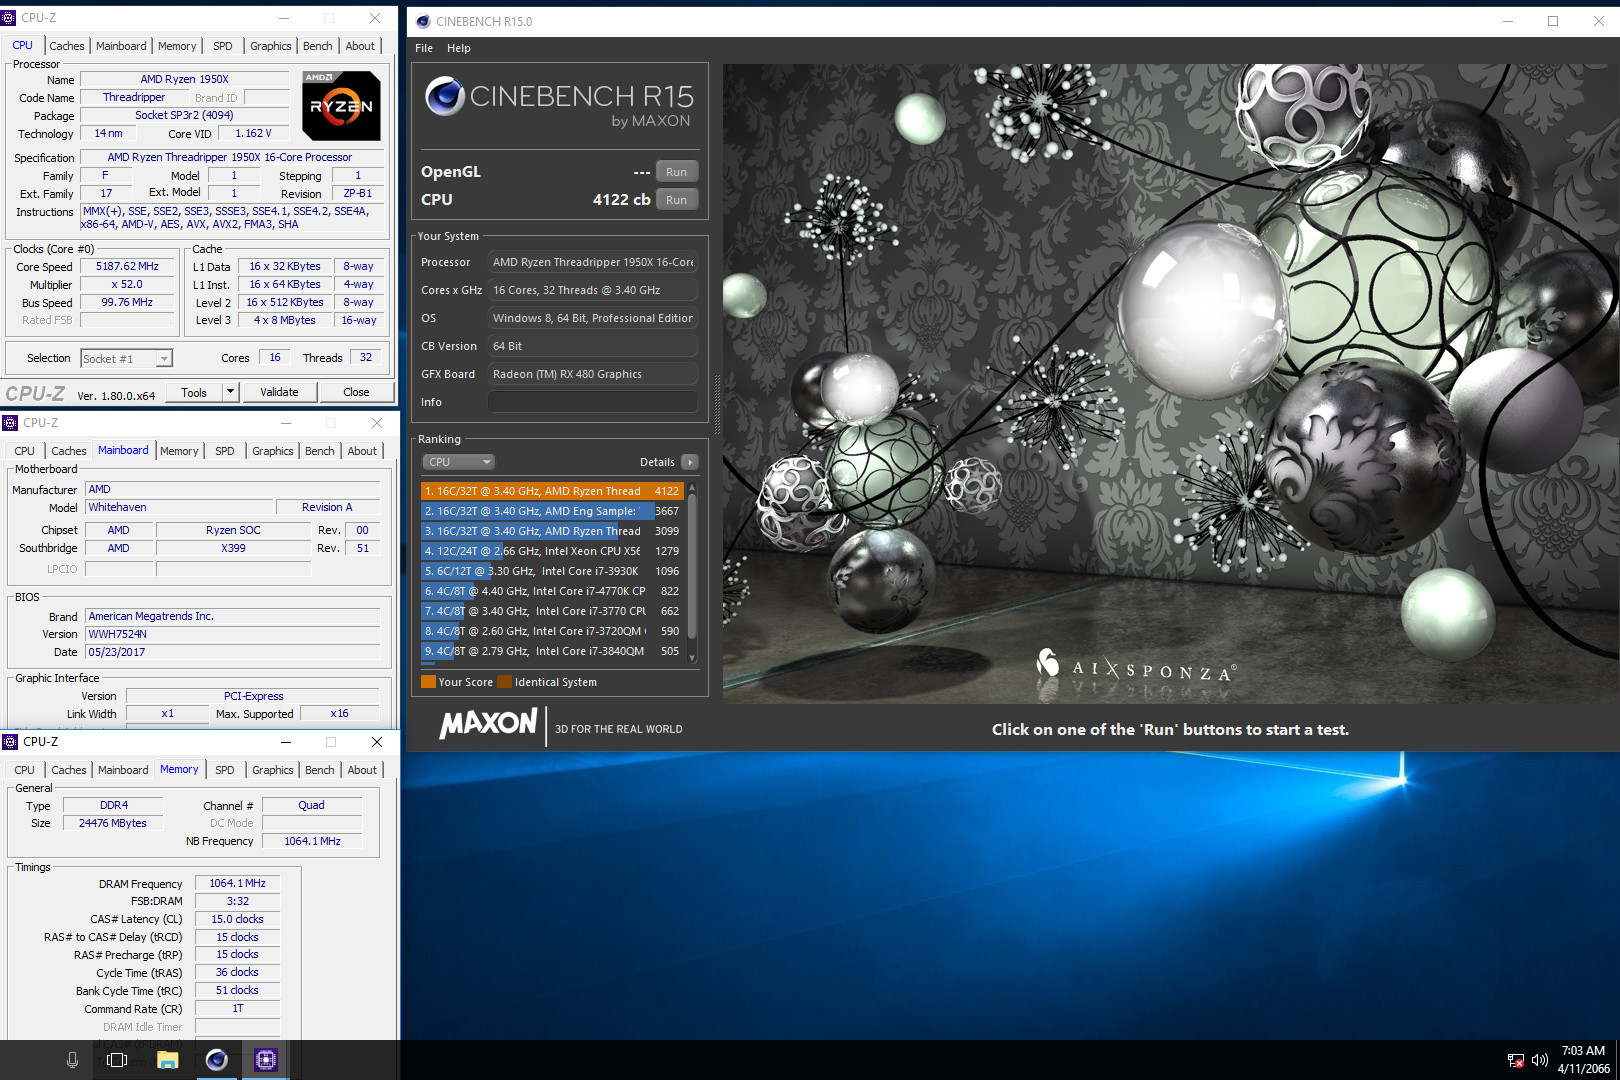 Media asset in full size related to 3dfxzone.it news item entitled as follows: Overclocking: una CPU AMD Threadripper 1950X esegue Cinebench a 5.2GHz | Image Name: news26832_AMD-Threadripper-1950X-Overclocking_1.jpg